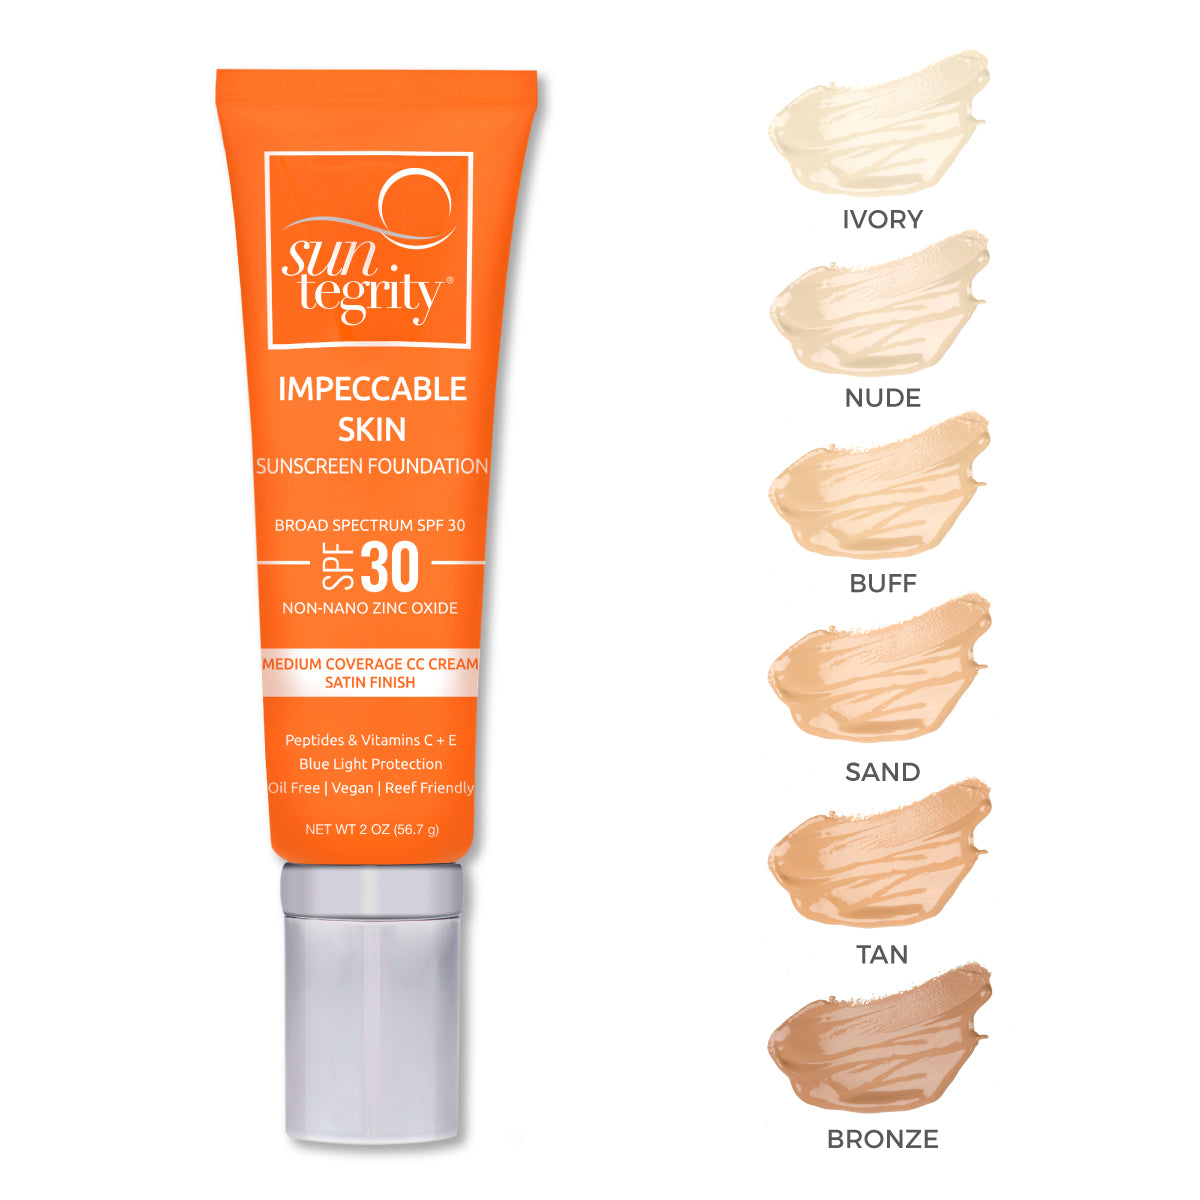 Suntegrity Impeccable Skin SPF 30 - all swatches - AILLEA